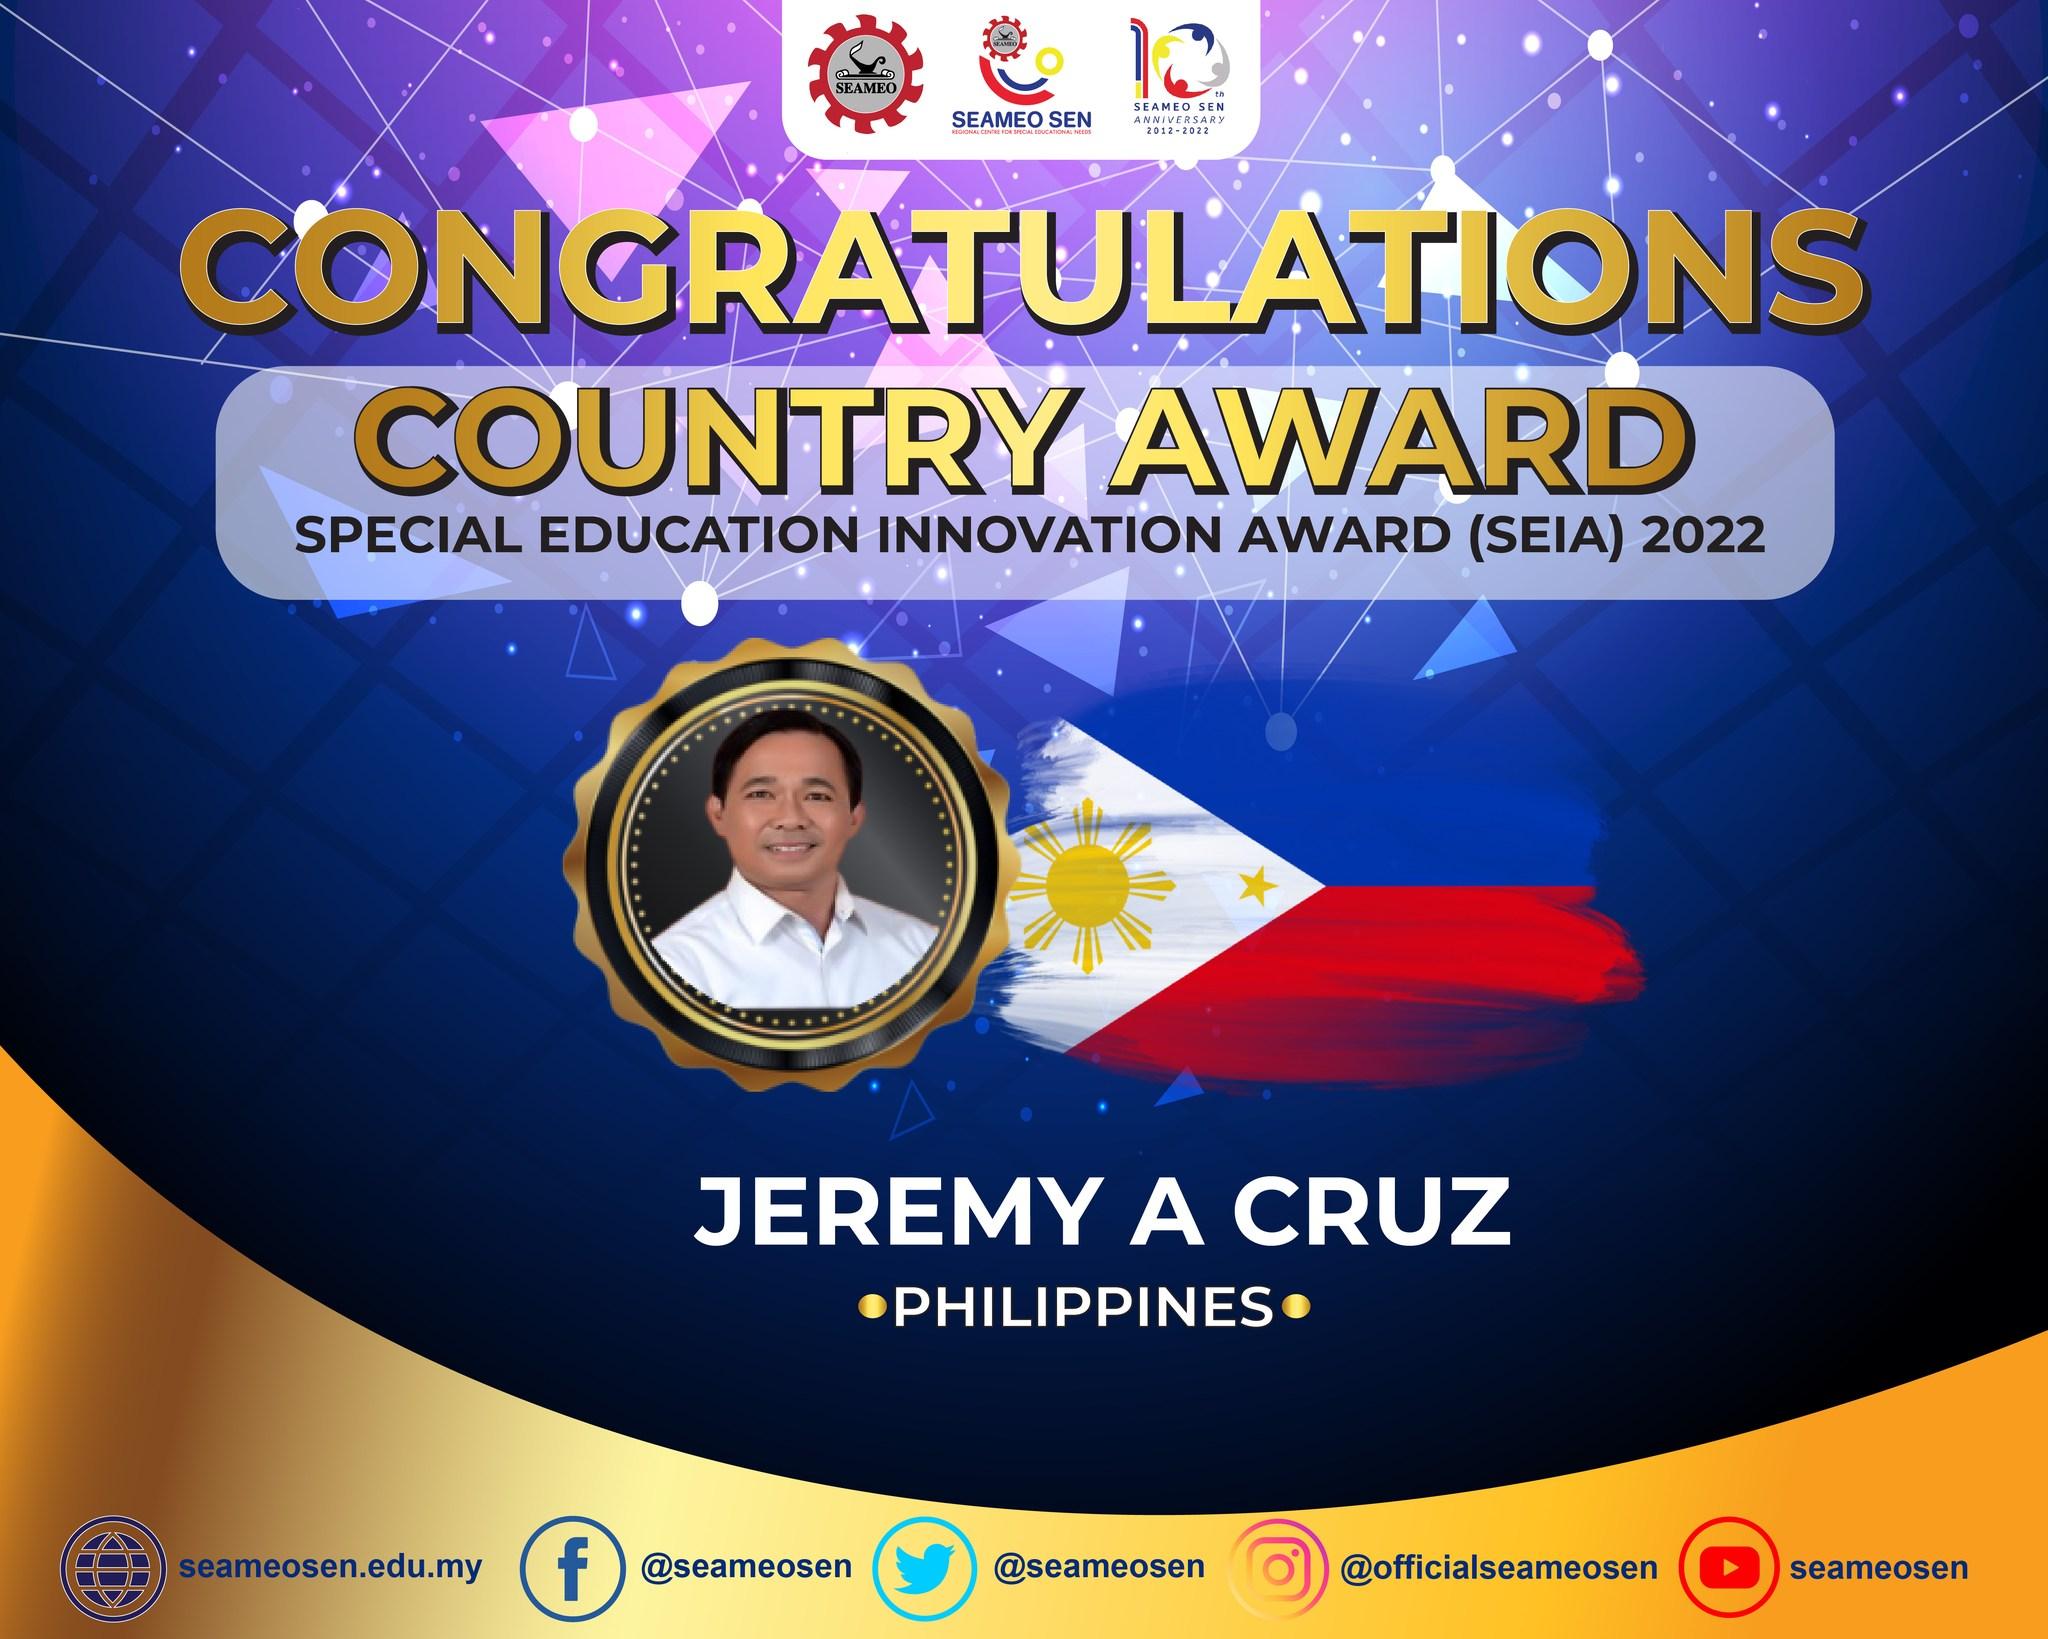 Country Award for Phillippines is Mr. Jeremy A Cruz